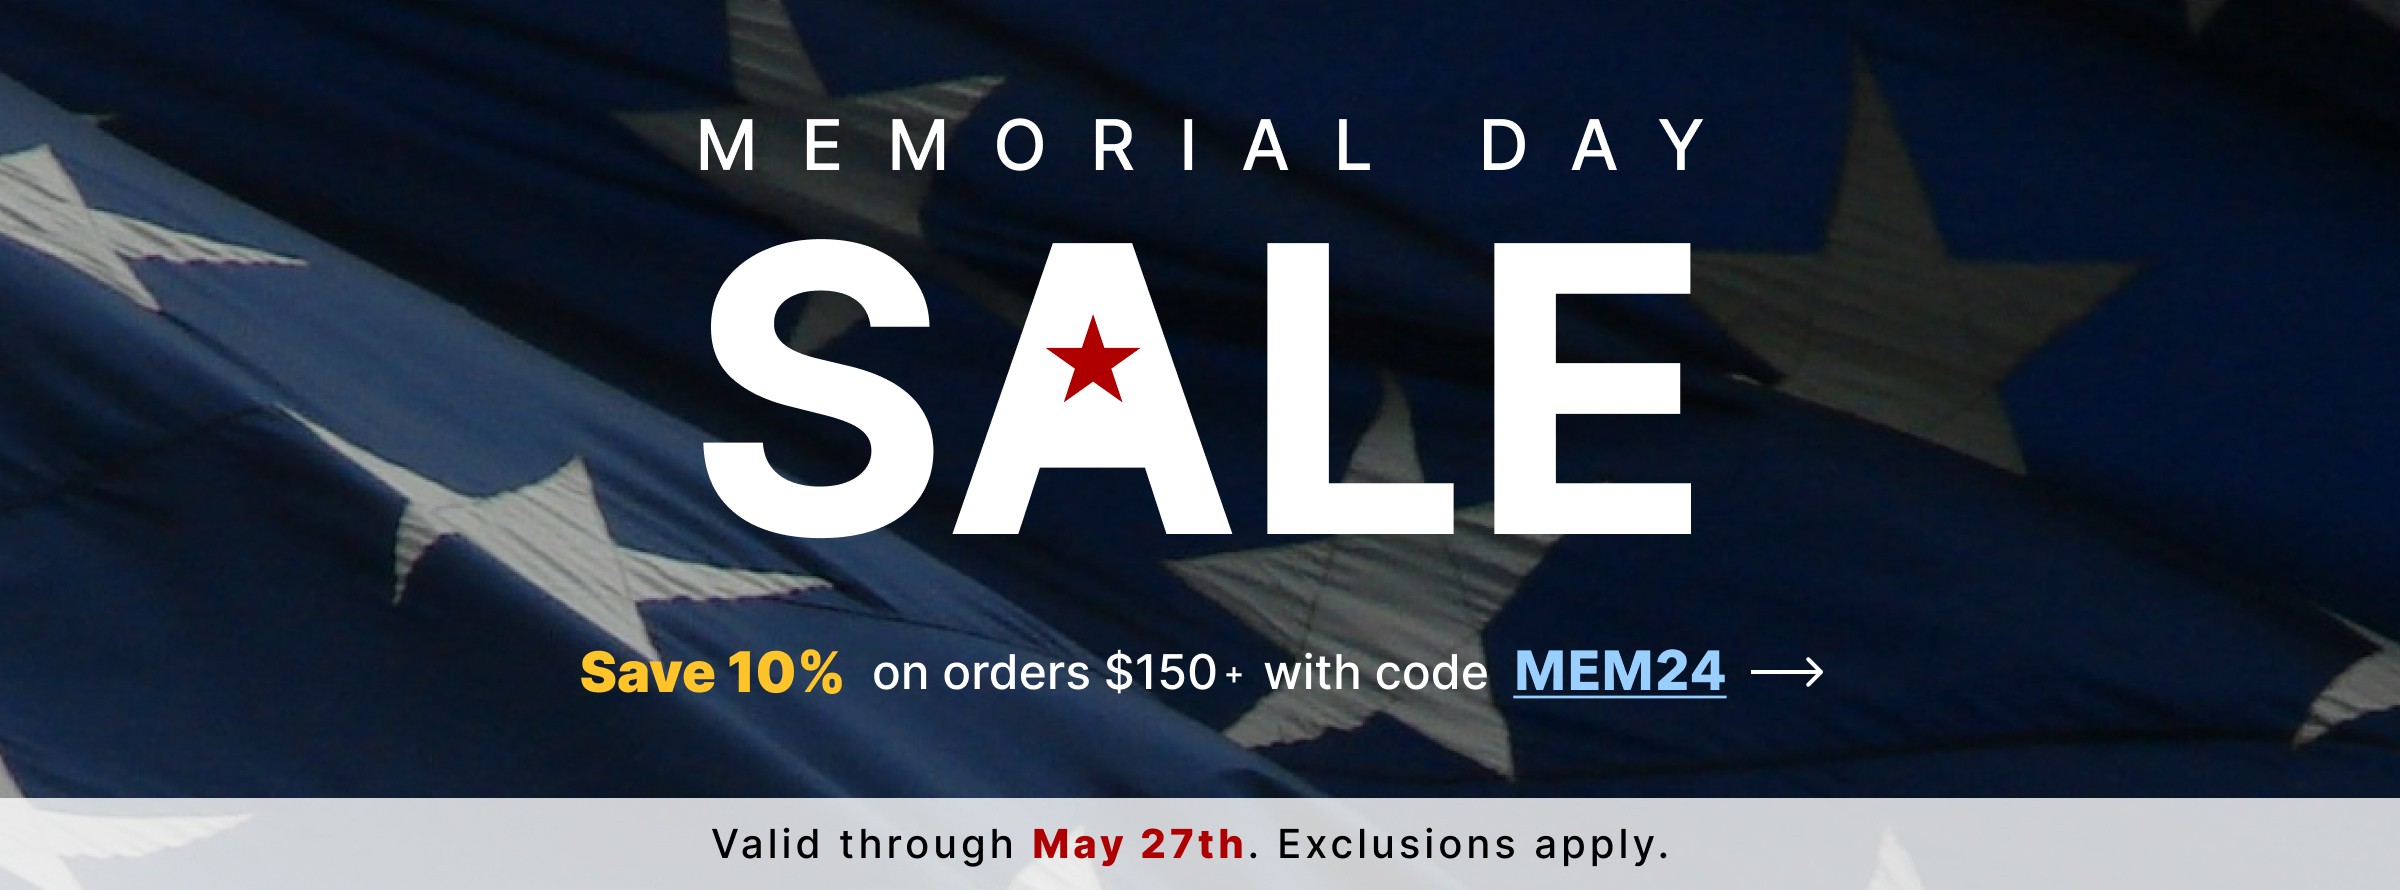 Memorial Day Sale - Save 10% Sitewide with MEM24